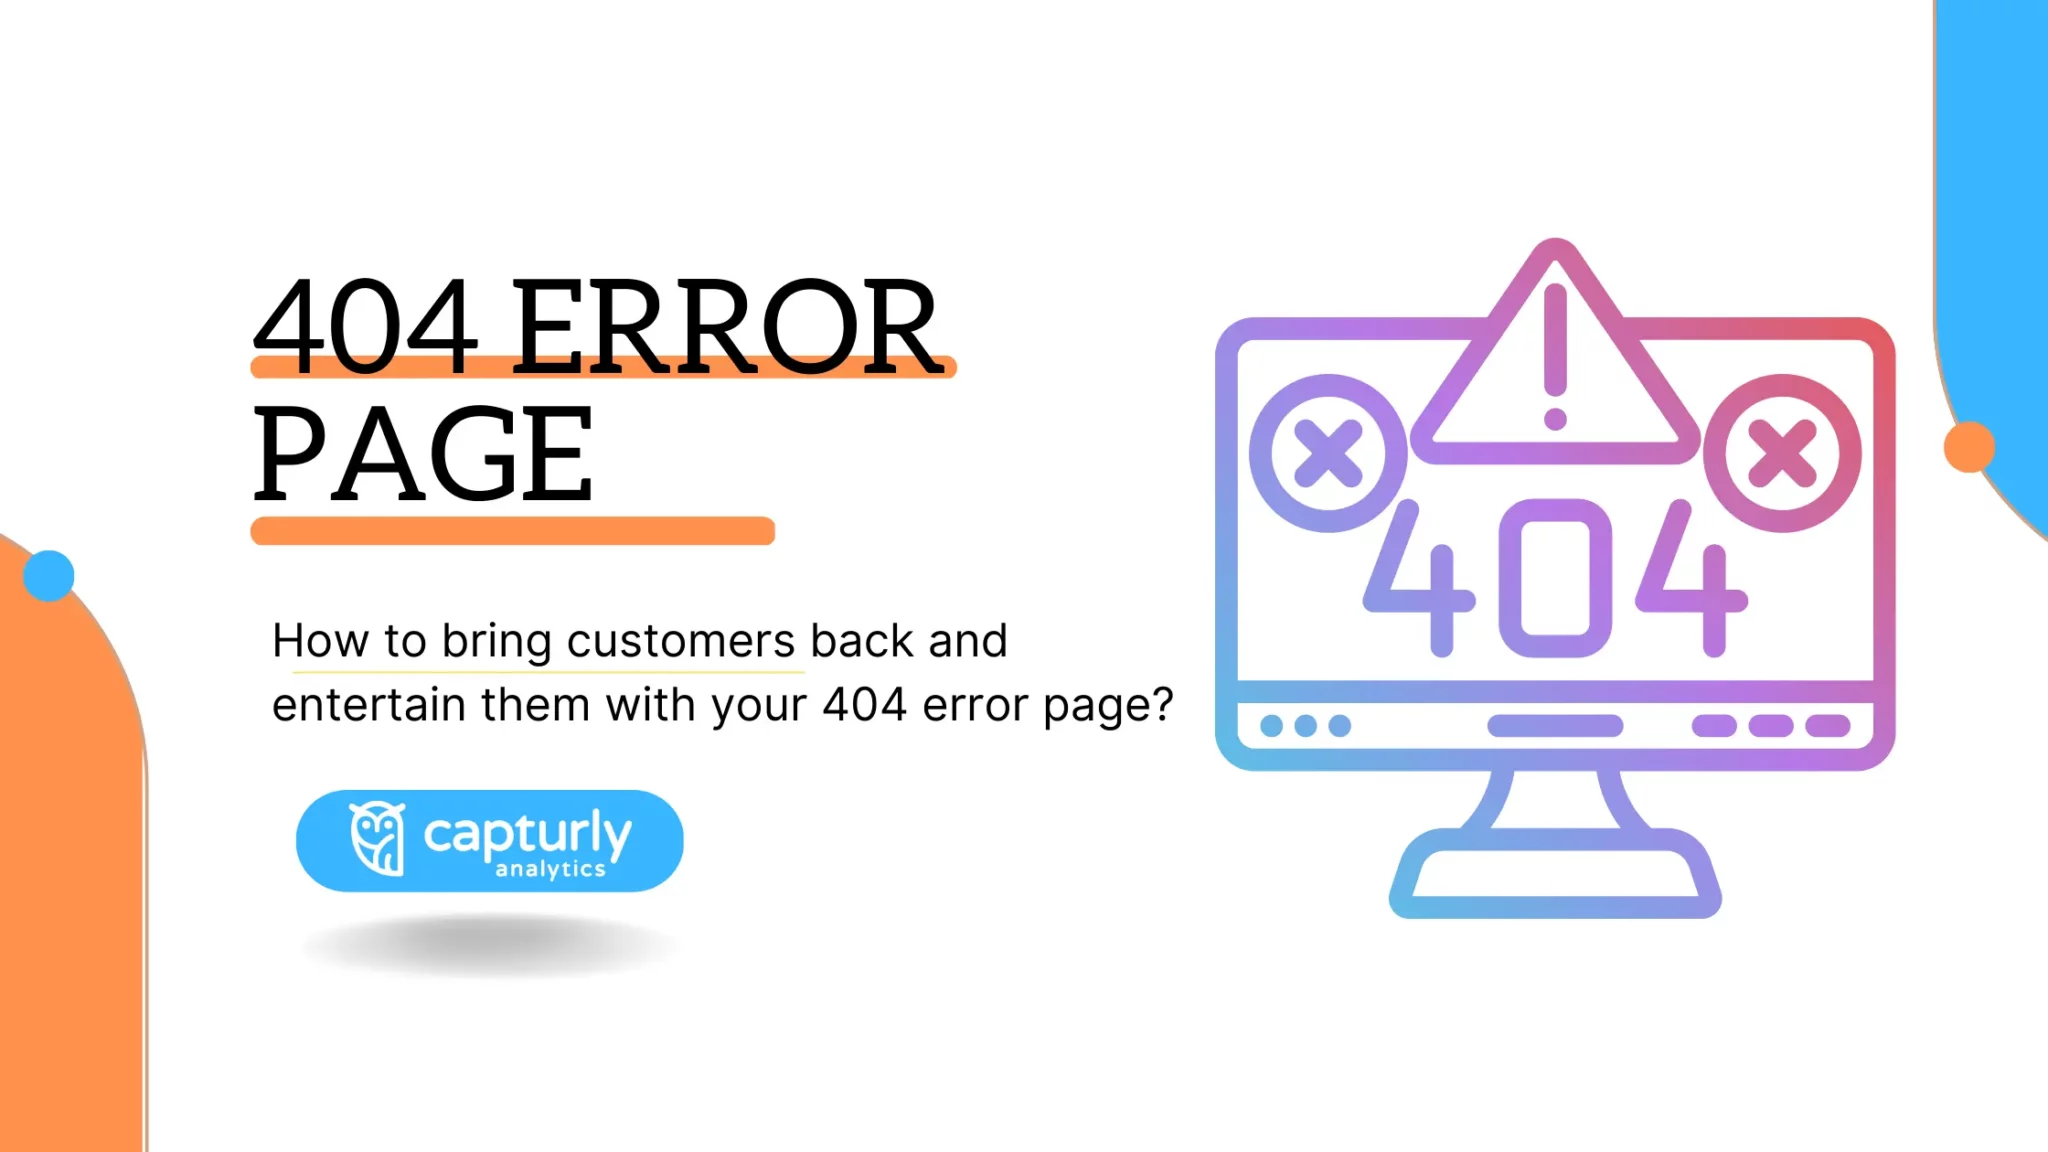 How to bring customers back and entertain them with your 404 error page?